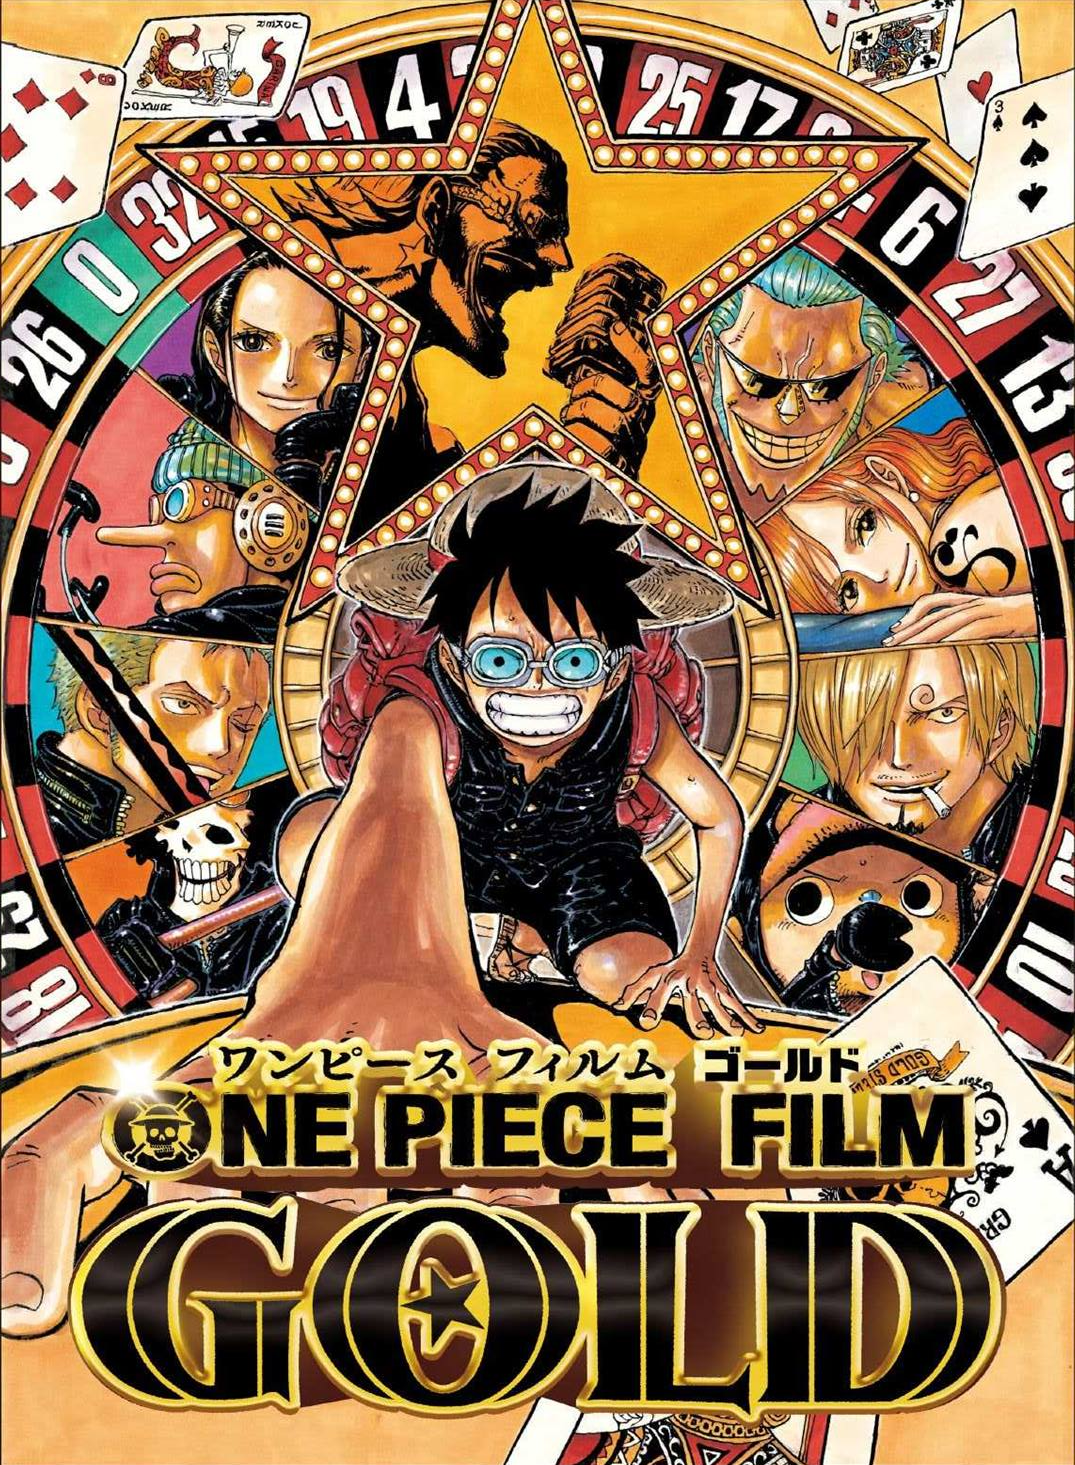 The Destruction of the Red Line and the End of One Piece : r/OnePiece